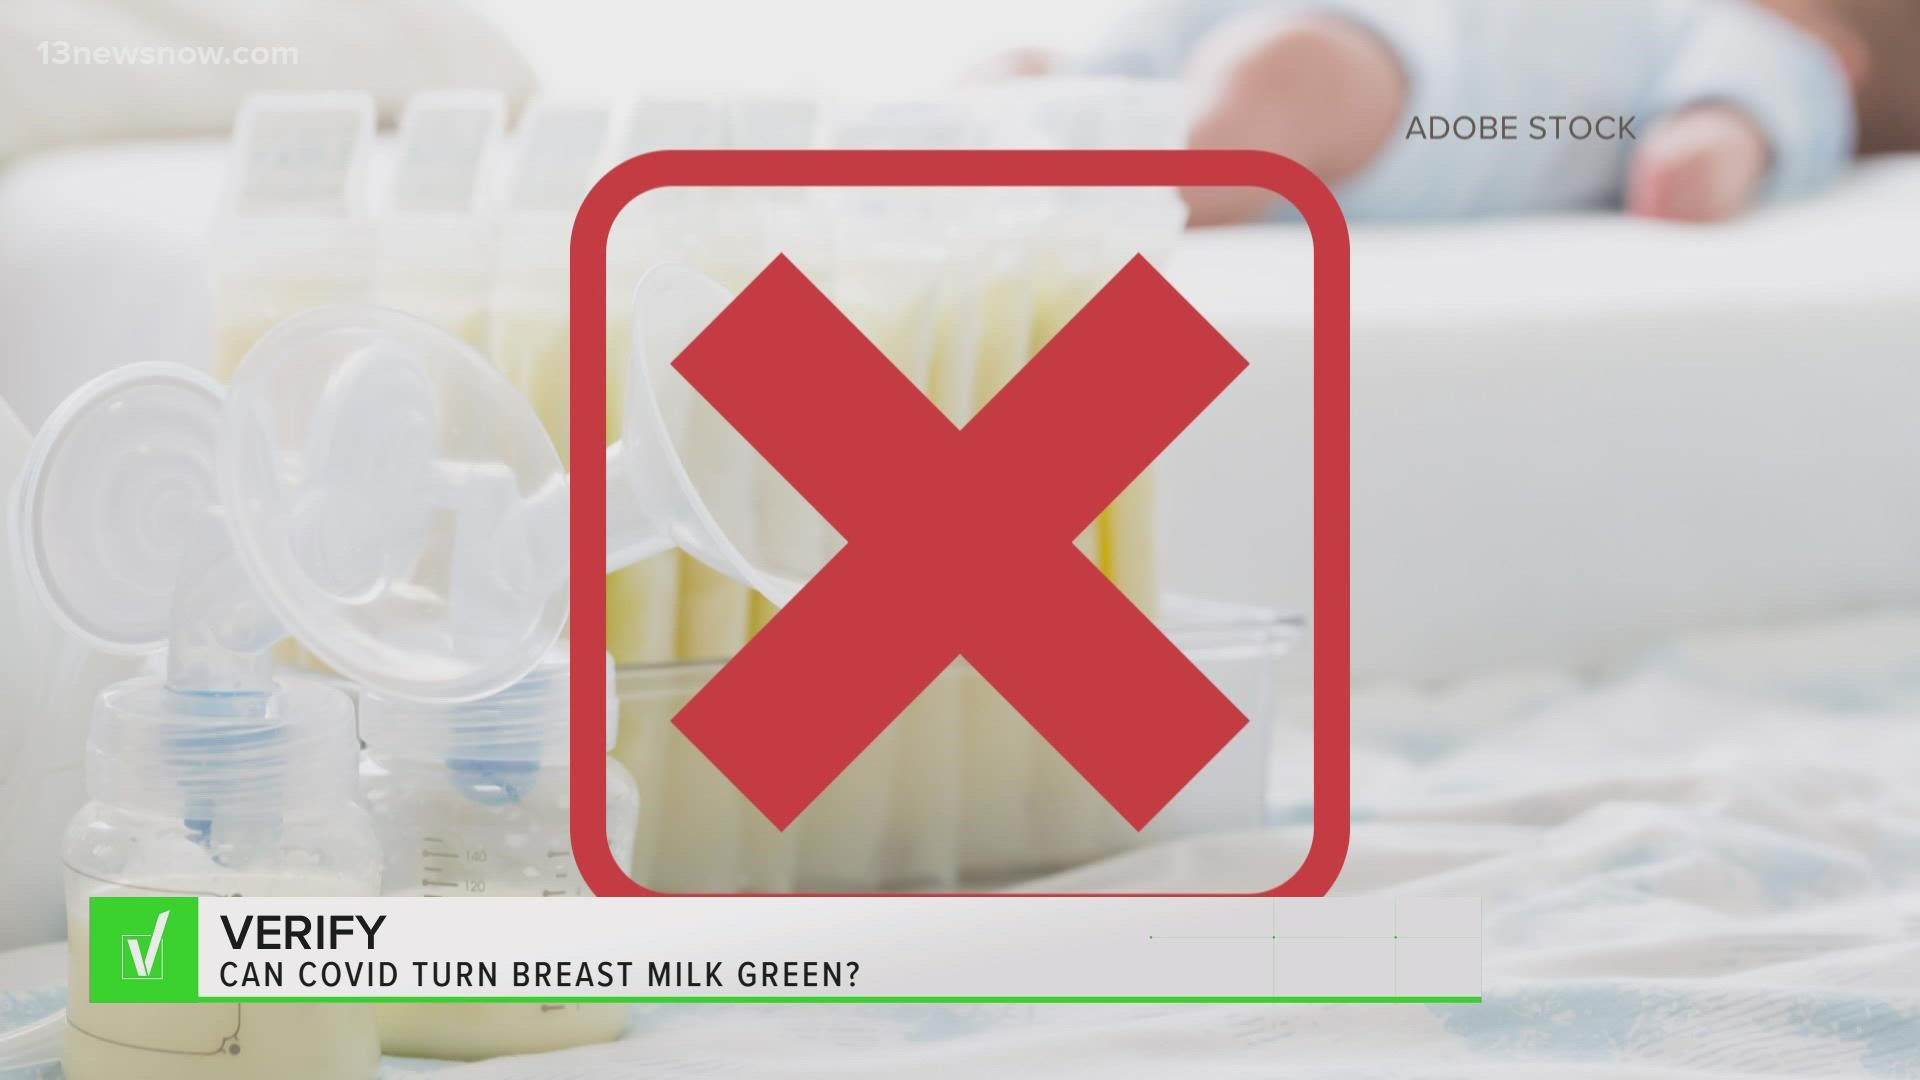 Though breast milk can take on a vast color palette, two health experts said none of their COVID-positive patients have had green breast milk.